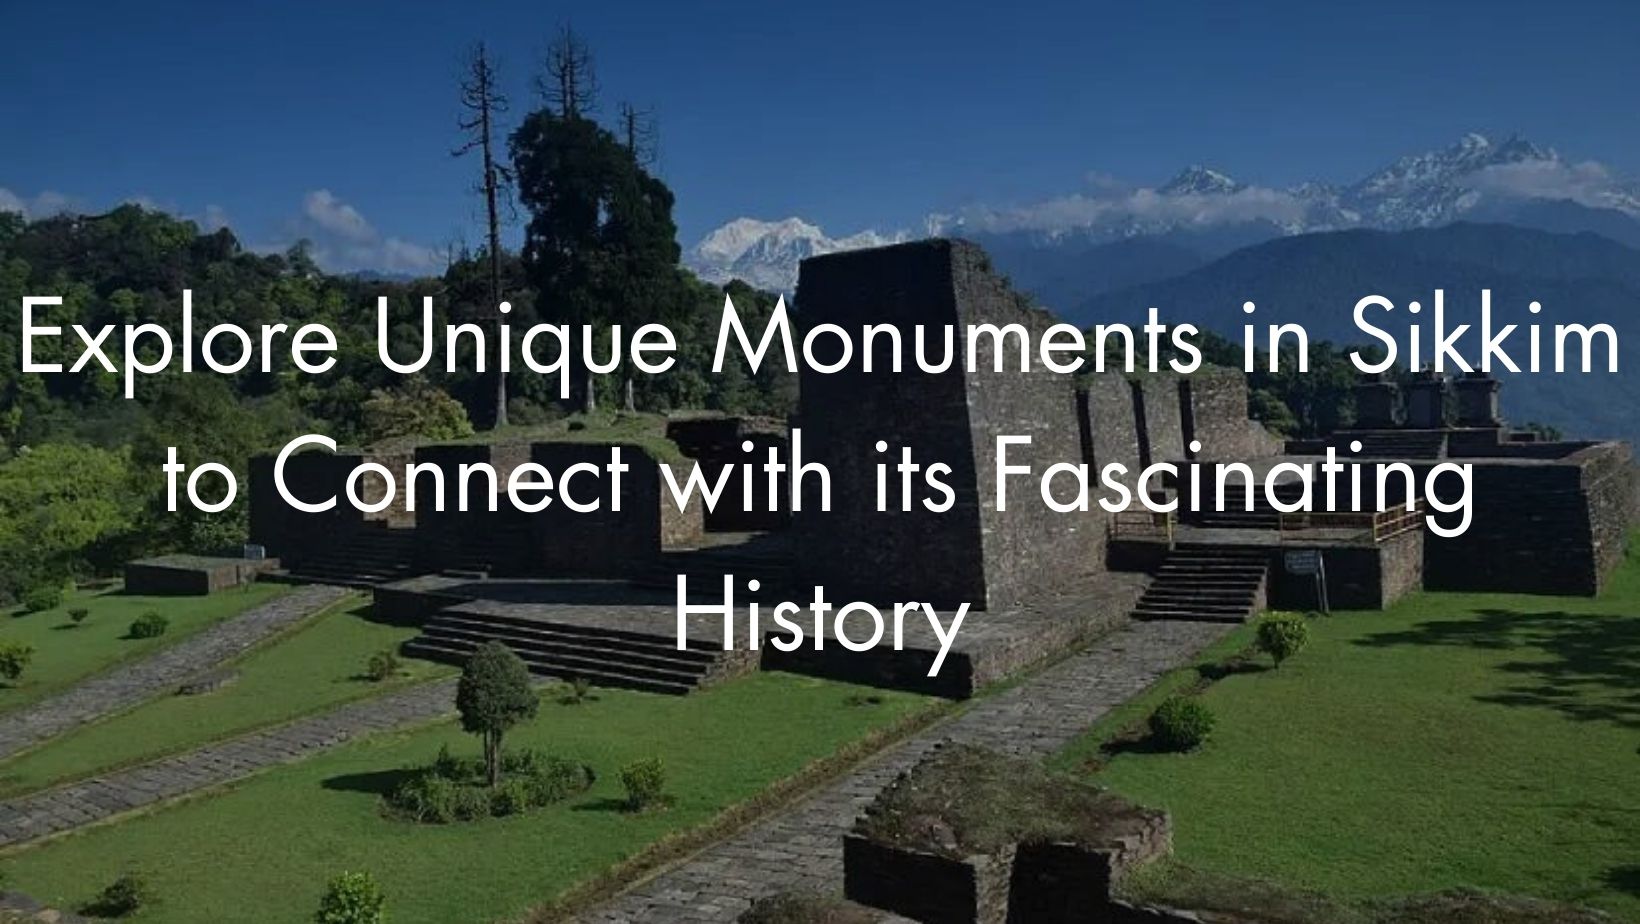 Explore Unique Monuments in Sikkim to Connect with its Fascinating History